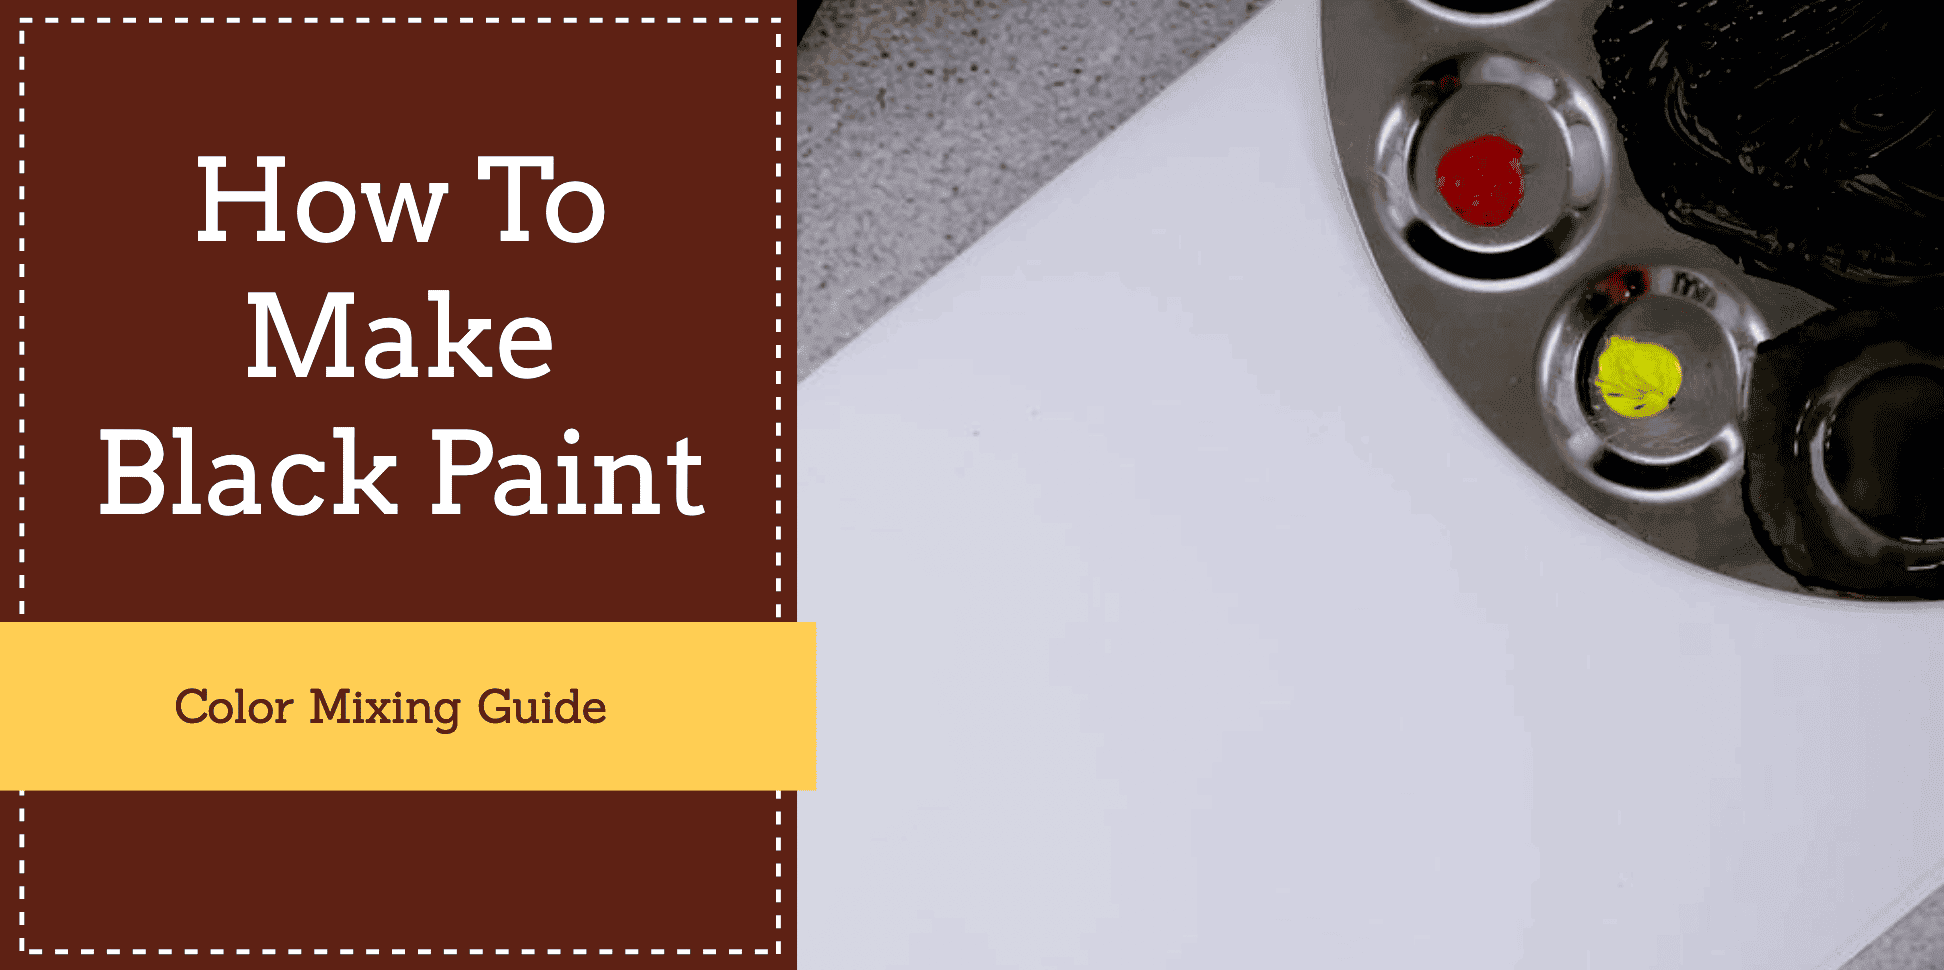 How to make black paint